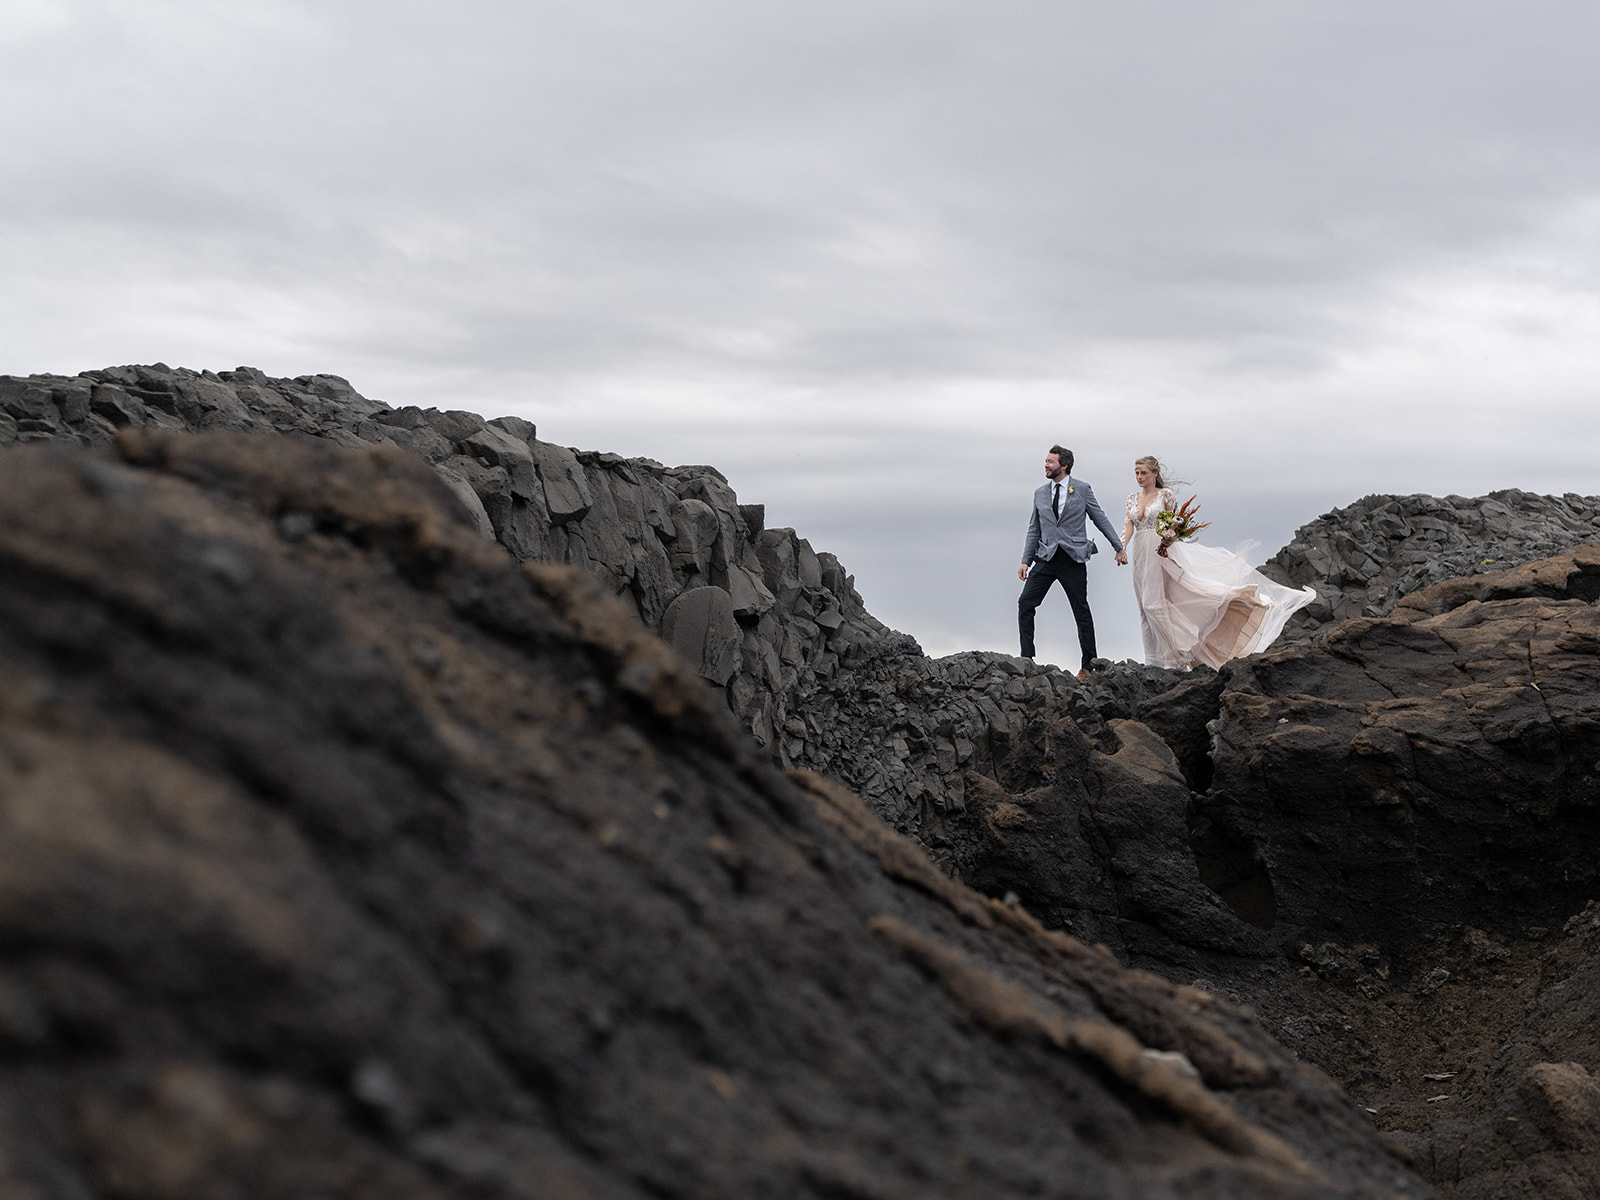 Bride and groom exploring Iceland during their Elopement